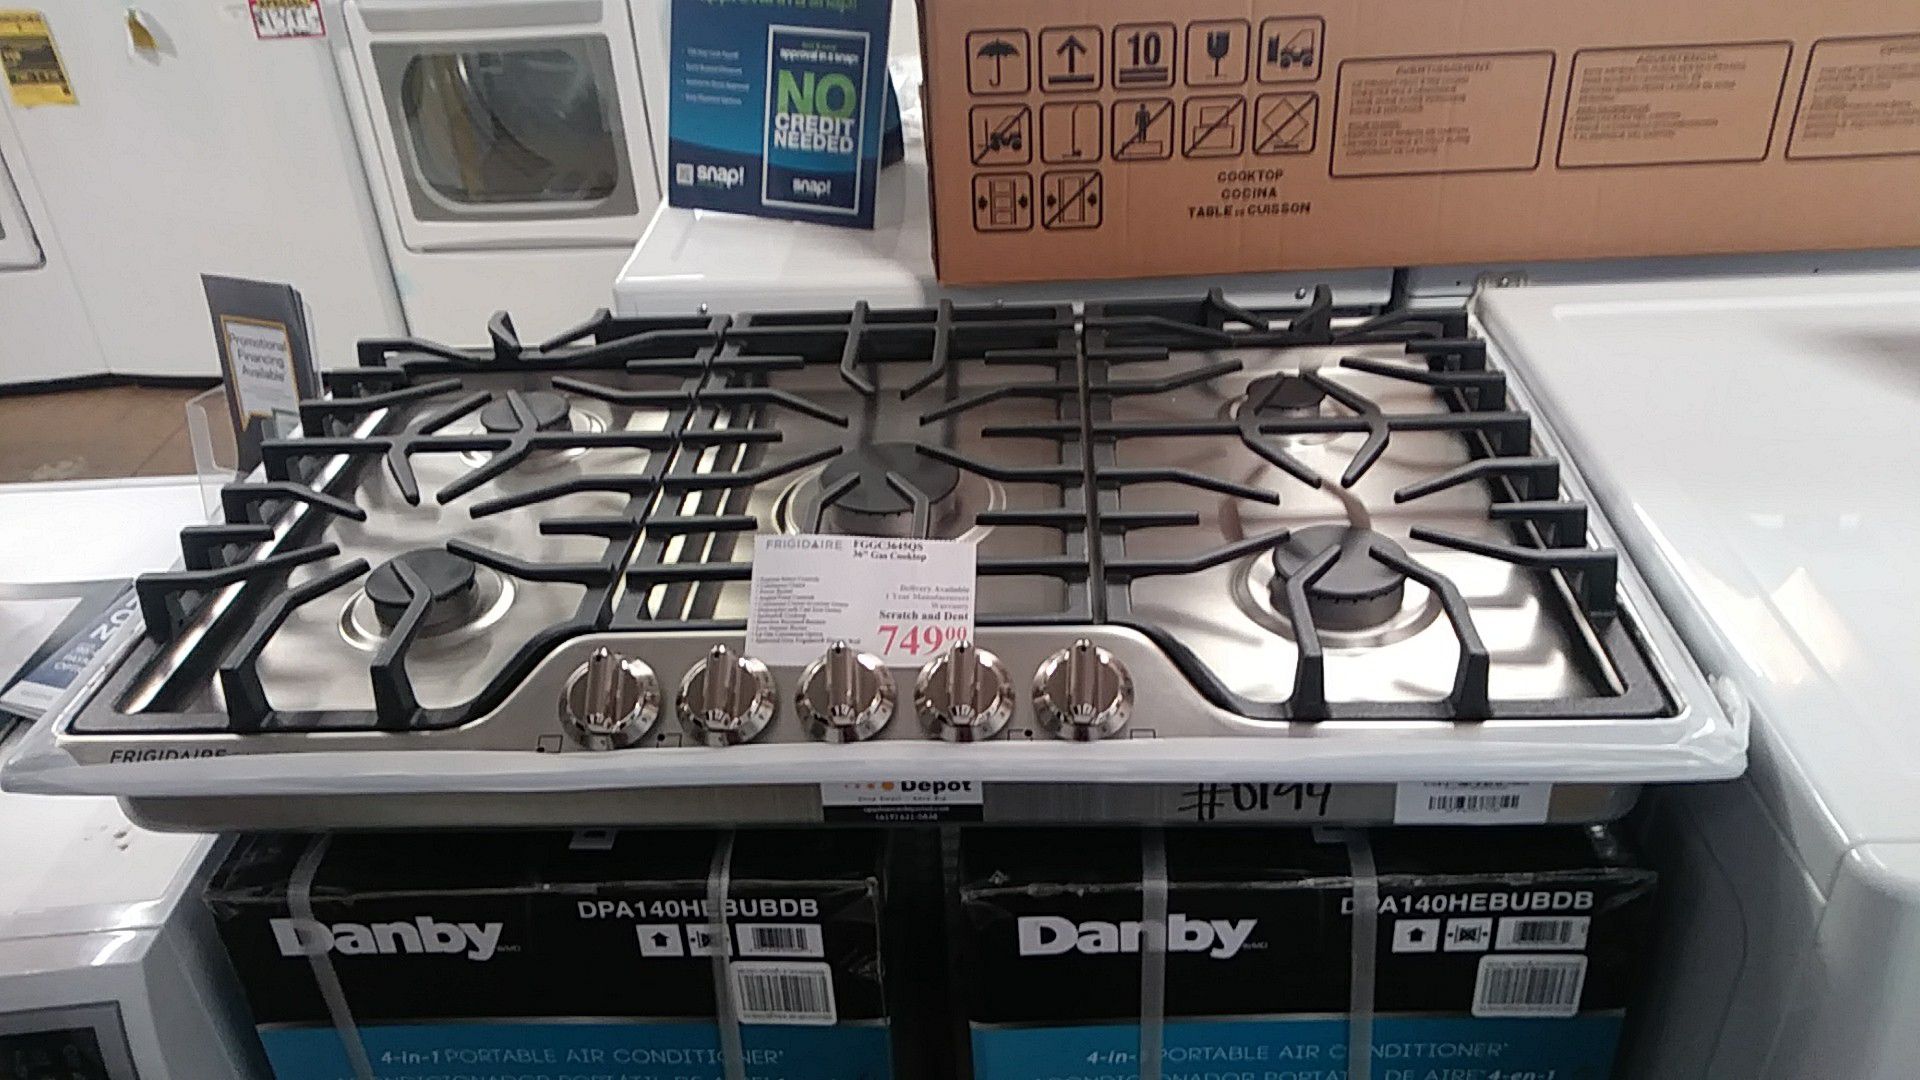 New Frigidaire 36" Gas Cooktop in Stainless Steel